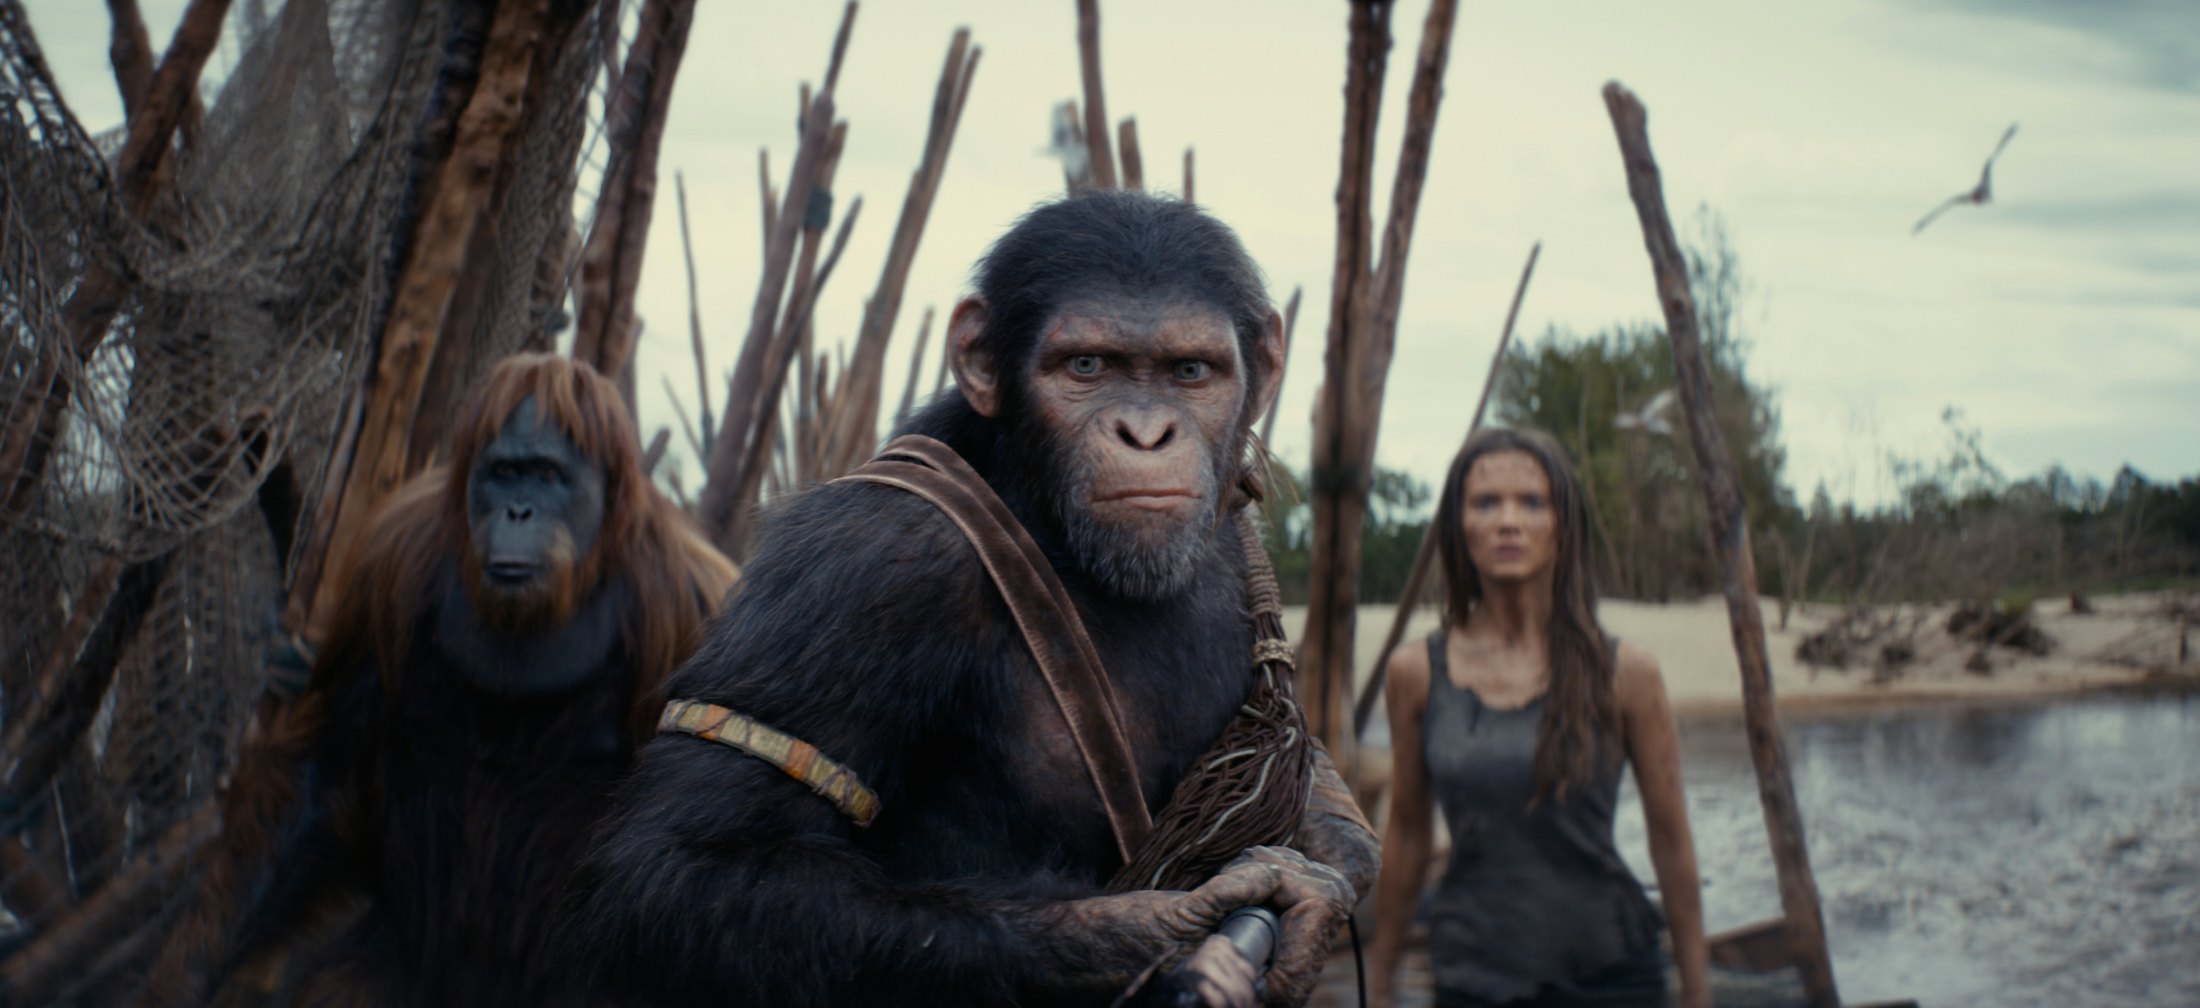 ‘Kingdom of the Planet of Apes’ Blu-Ray Release Will Feature a Historic First